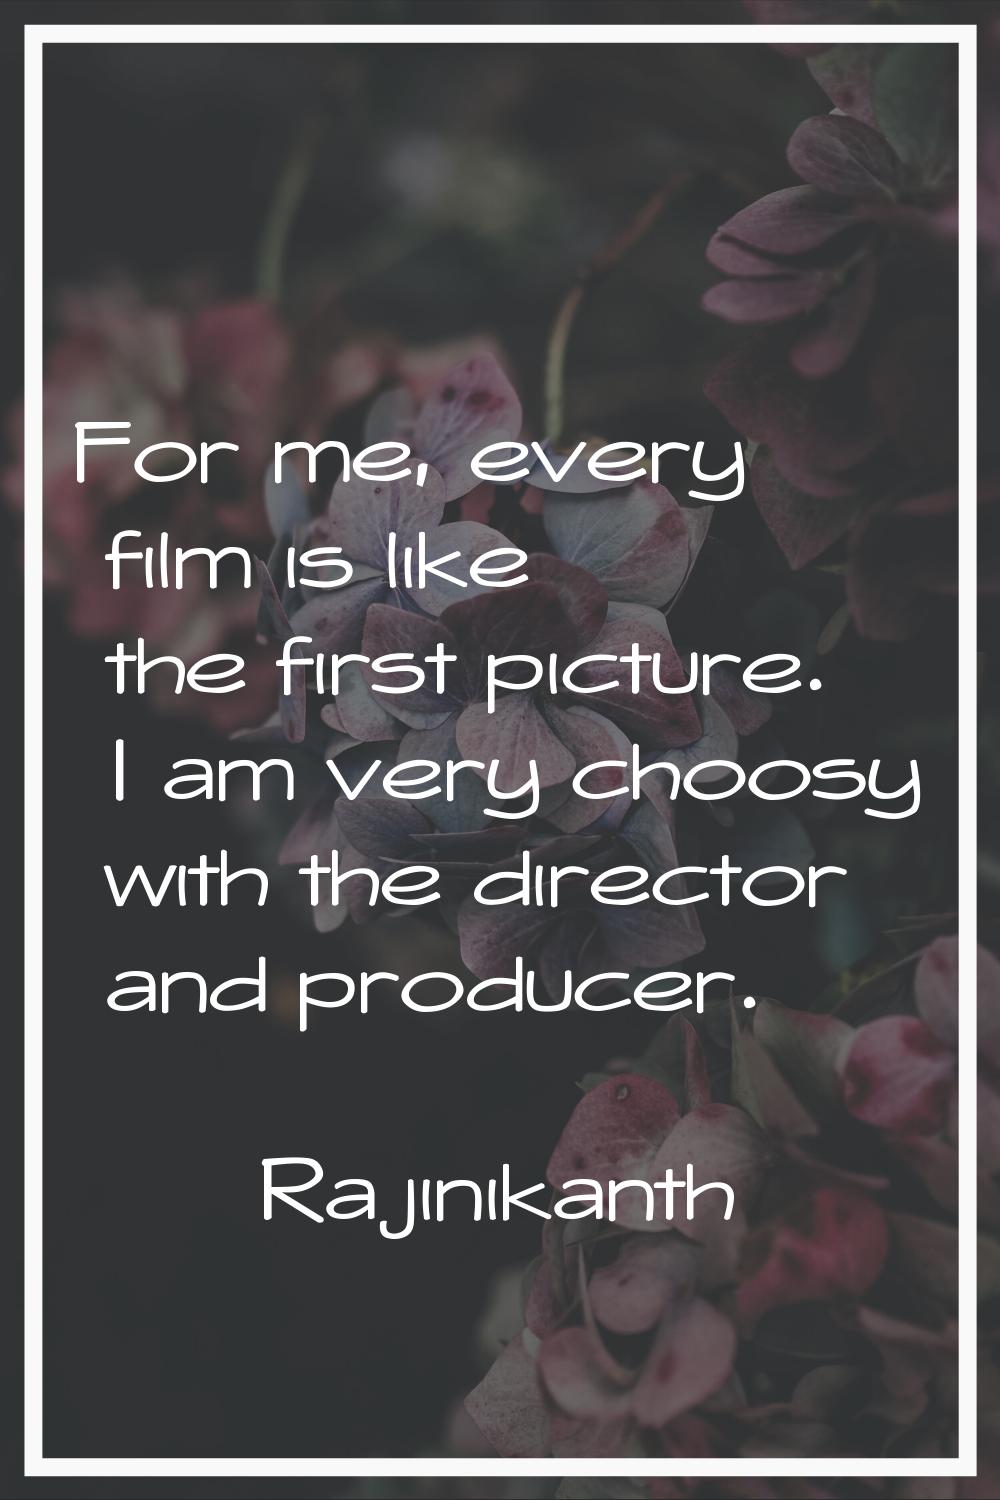 For me, every film is like the first picture. I am very choosy with the director and producer.